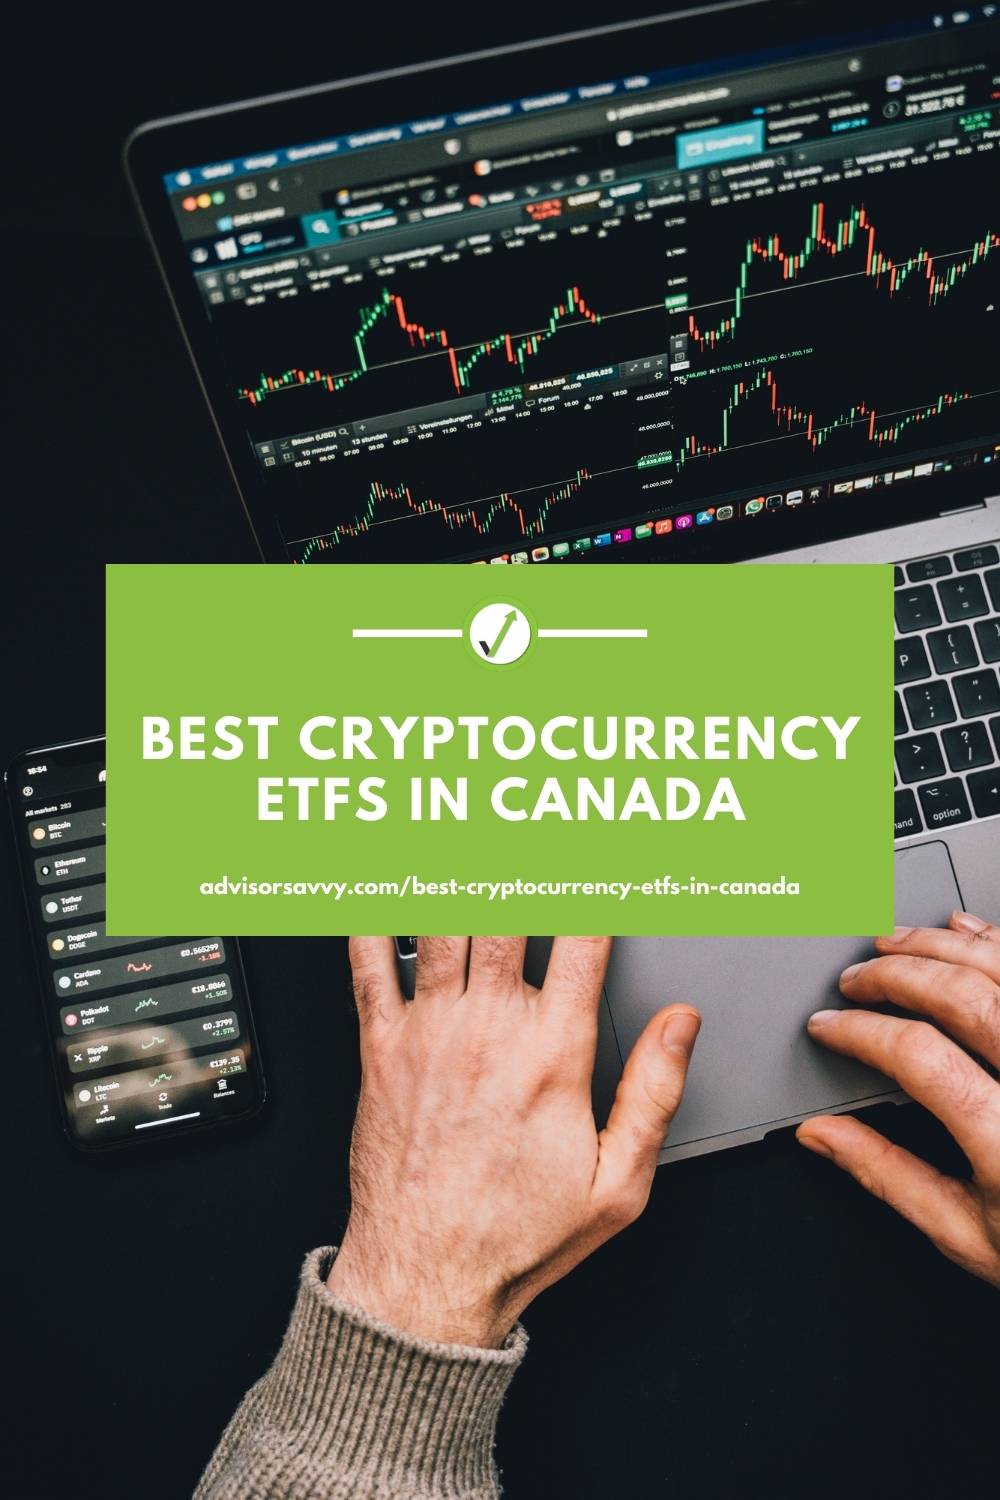 how to get into cryptocurrency canada